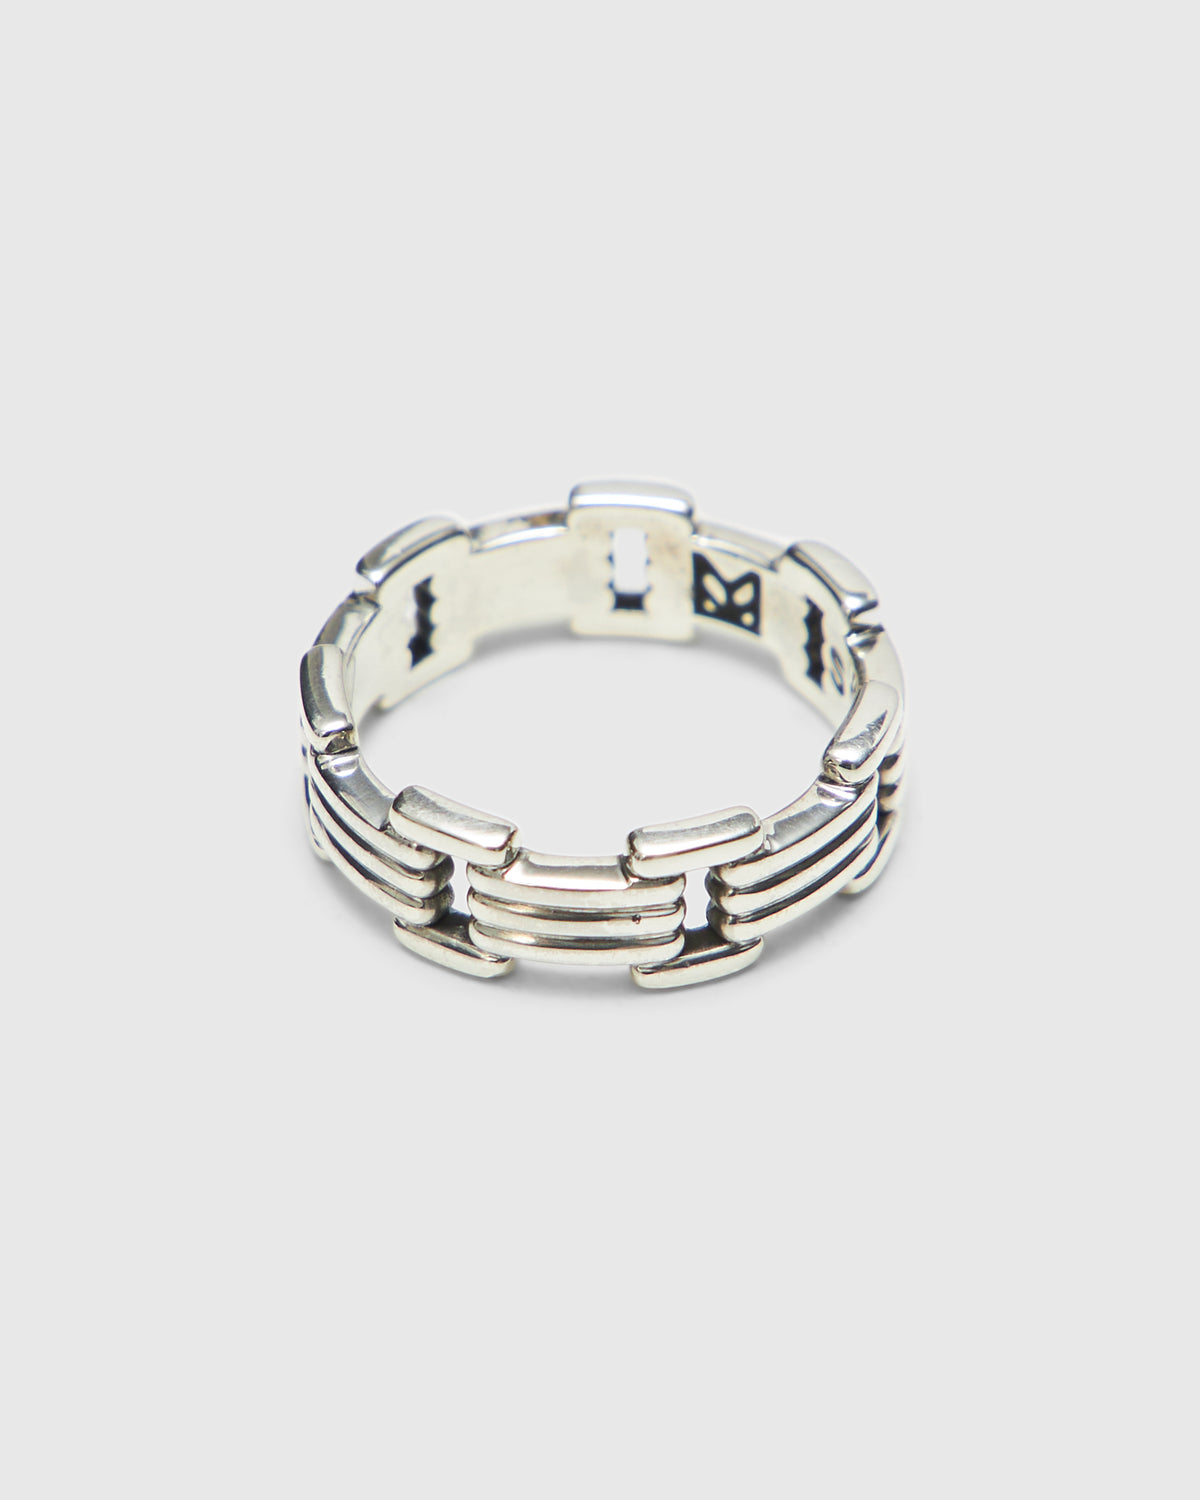 Lui Link Ring in Silver 925